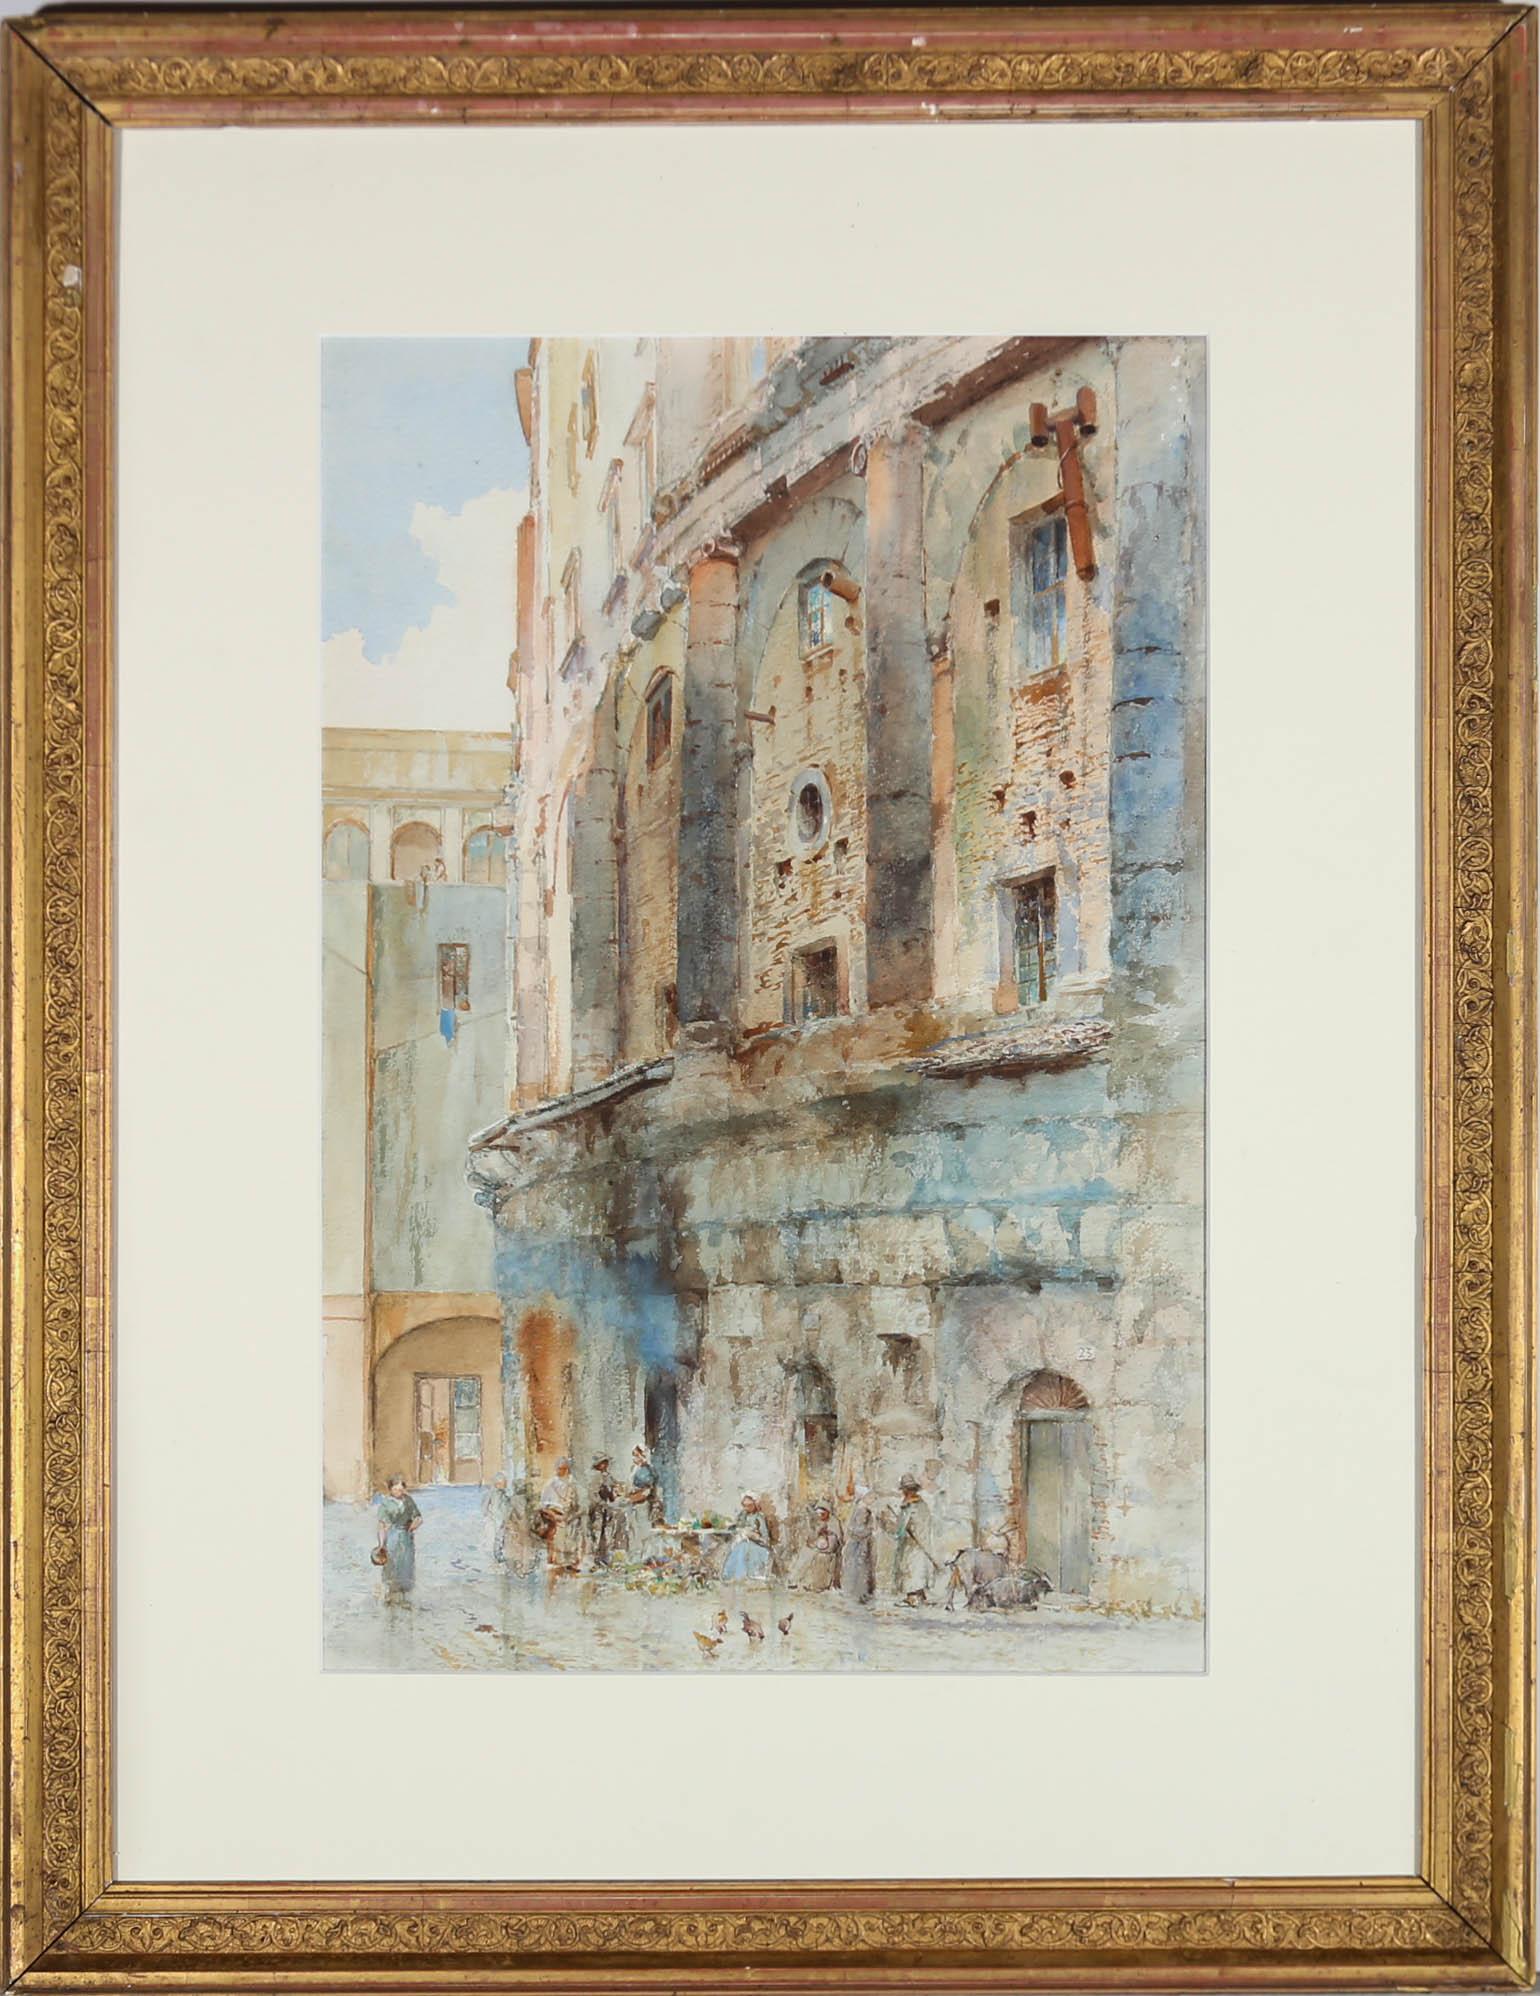 Benjamin J. M. Donne (1831-1928) - Framed Watercolour, The Theatre of Marcellus